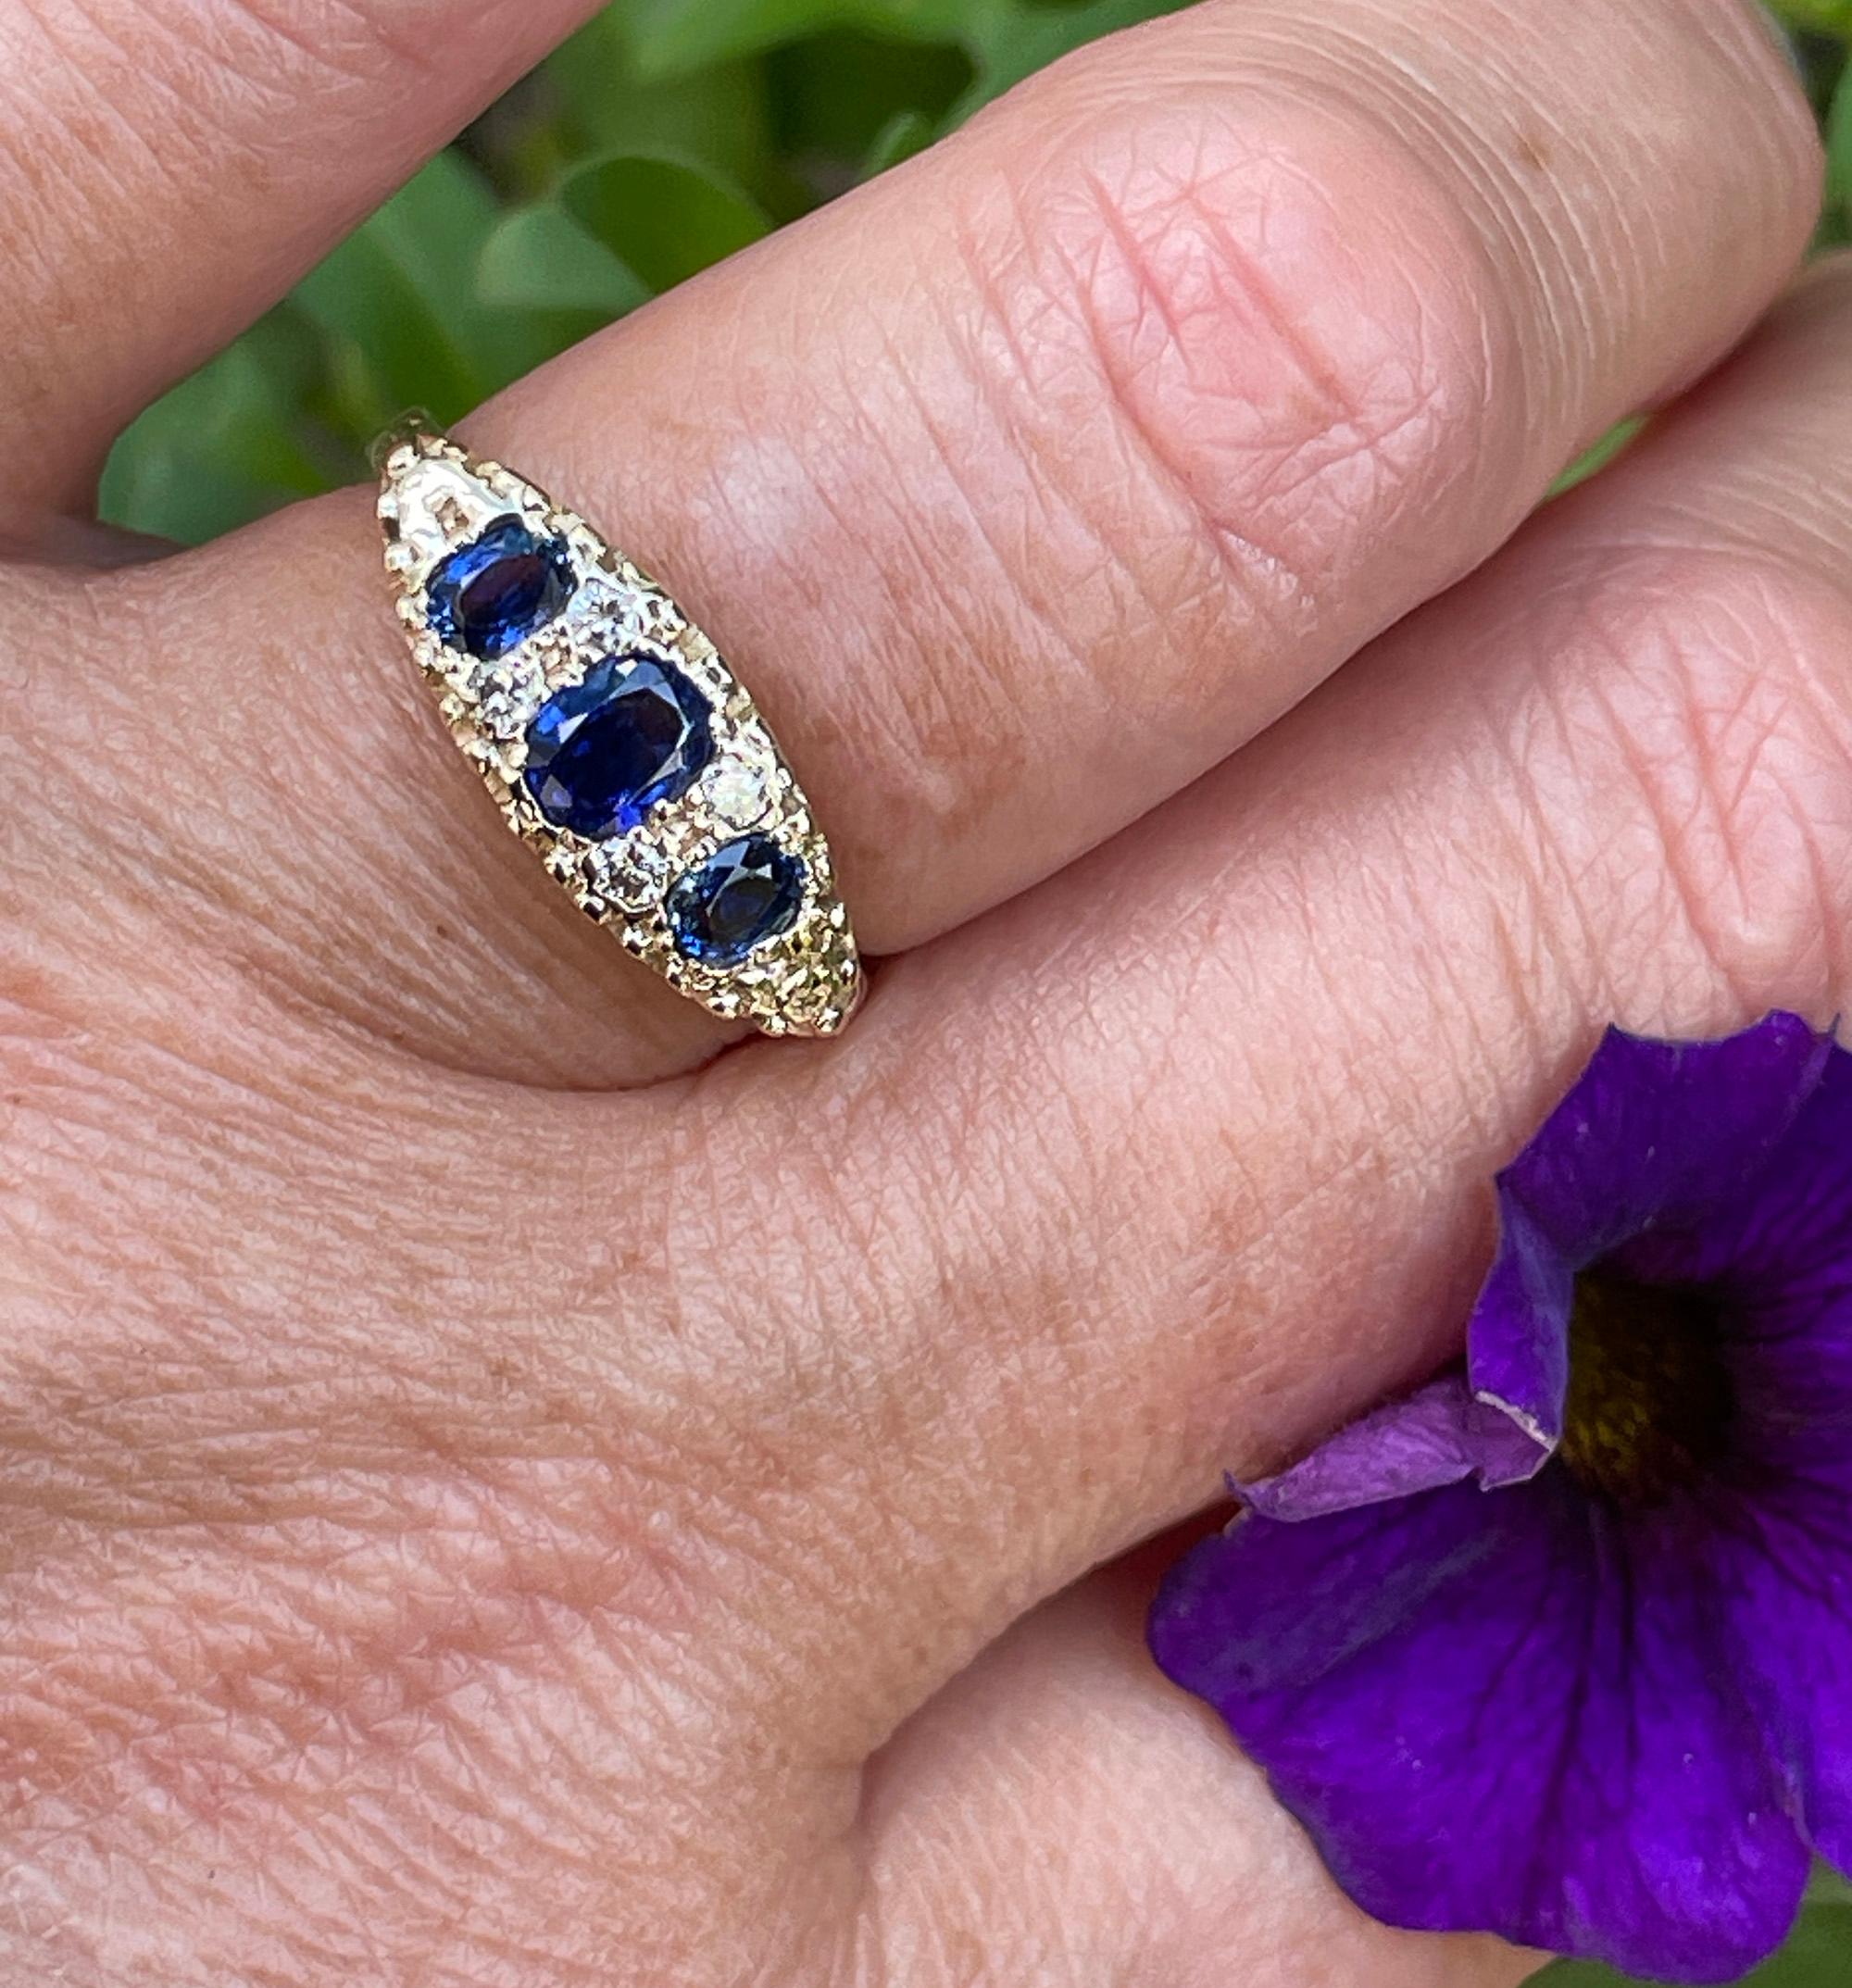 A Beautiful English Vintage Revived VICTORIAN Trilogy 16k Yellow Gold Ring with Blue Sapphires & Diamonds.
A trio of bright deep blue Oval-cut sapphires is accented in dramatic contrast with pairs of bright white and sparkling round diamonds, in